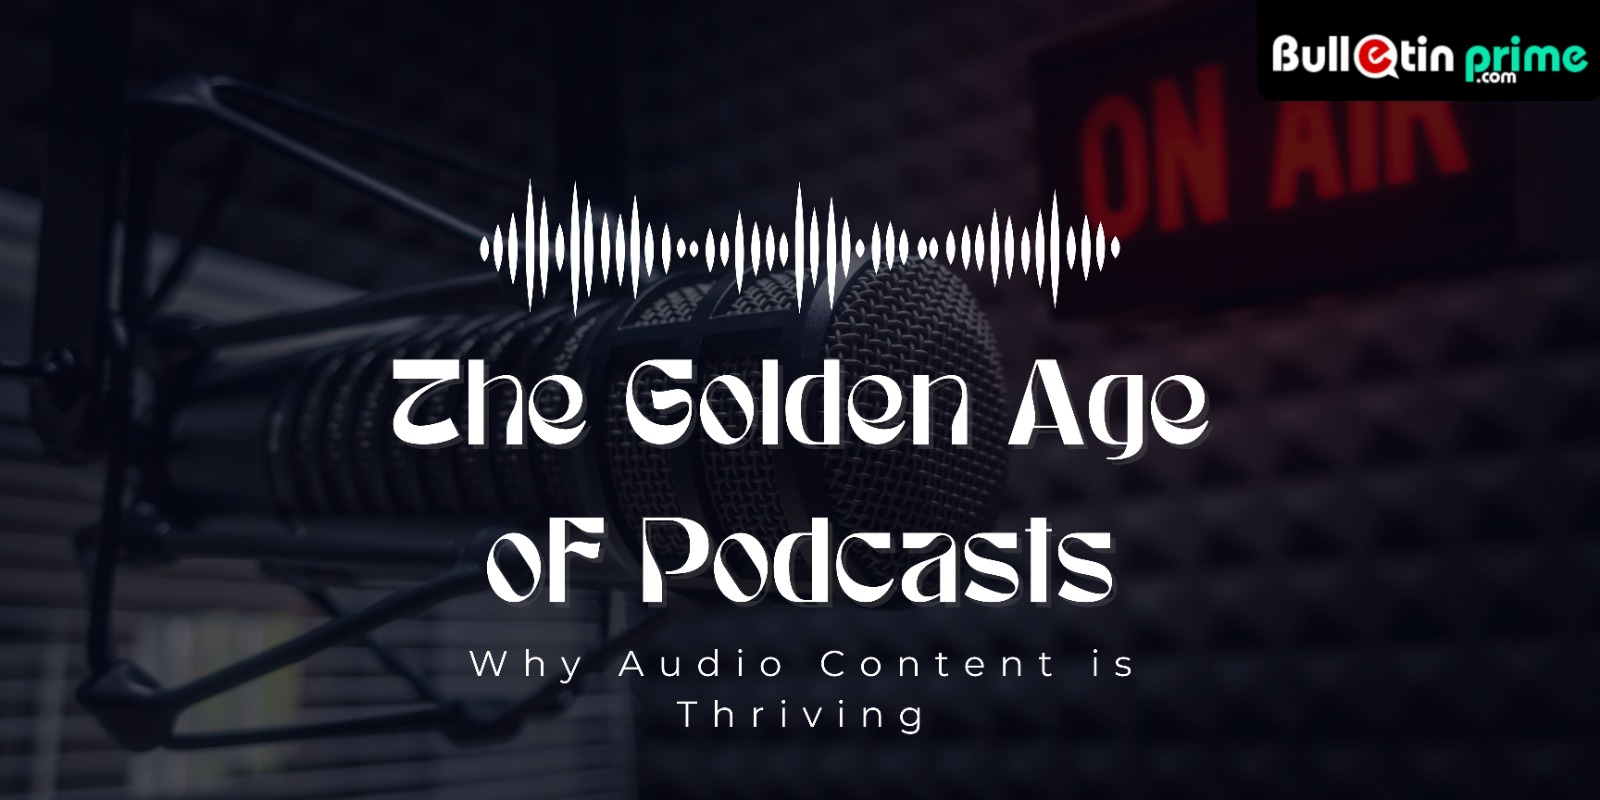 Age of Podcasts